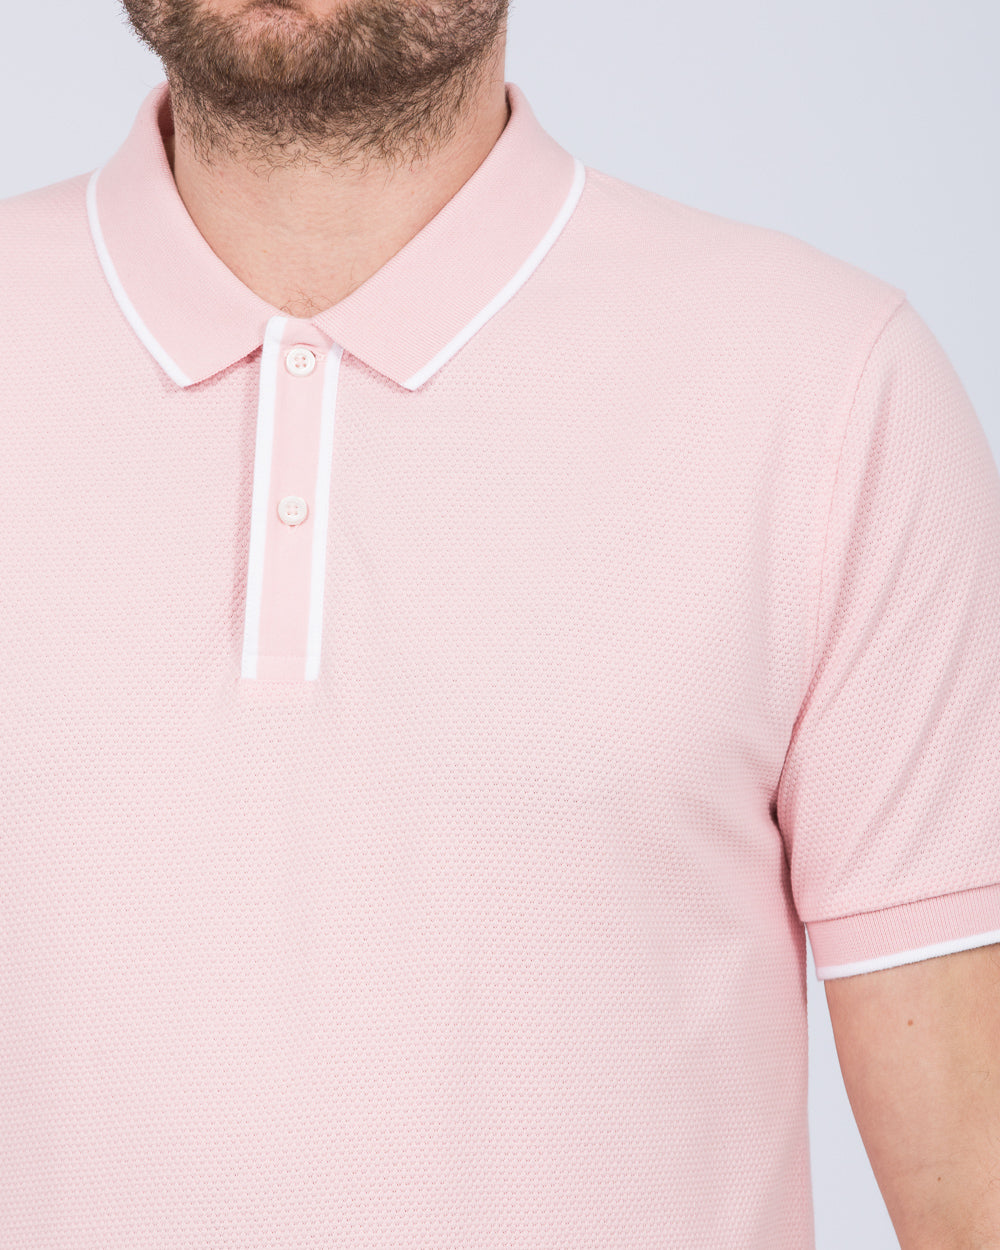 2t Slim Fit Tall Tipped Polo Shirt (pink)